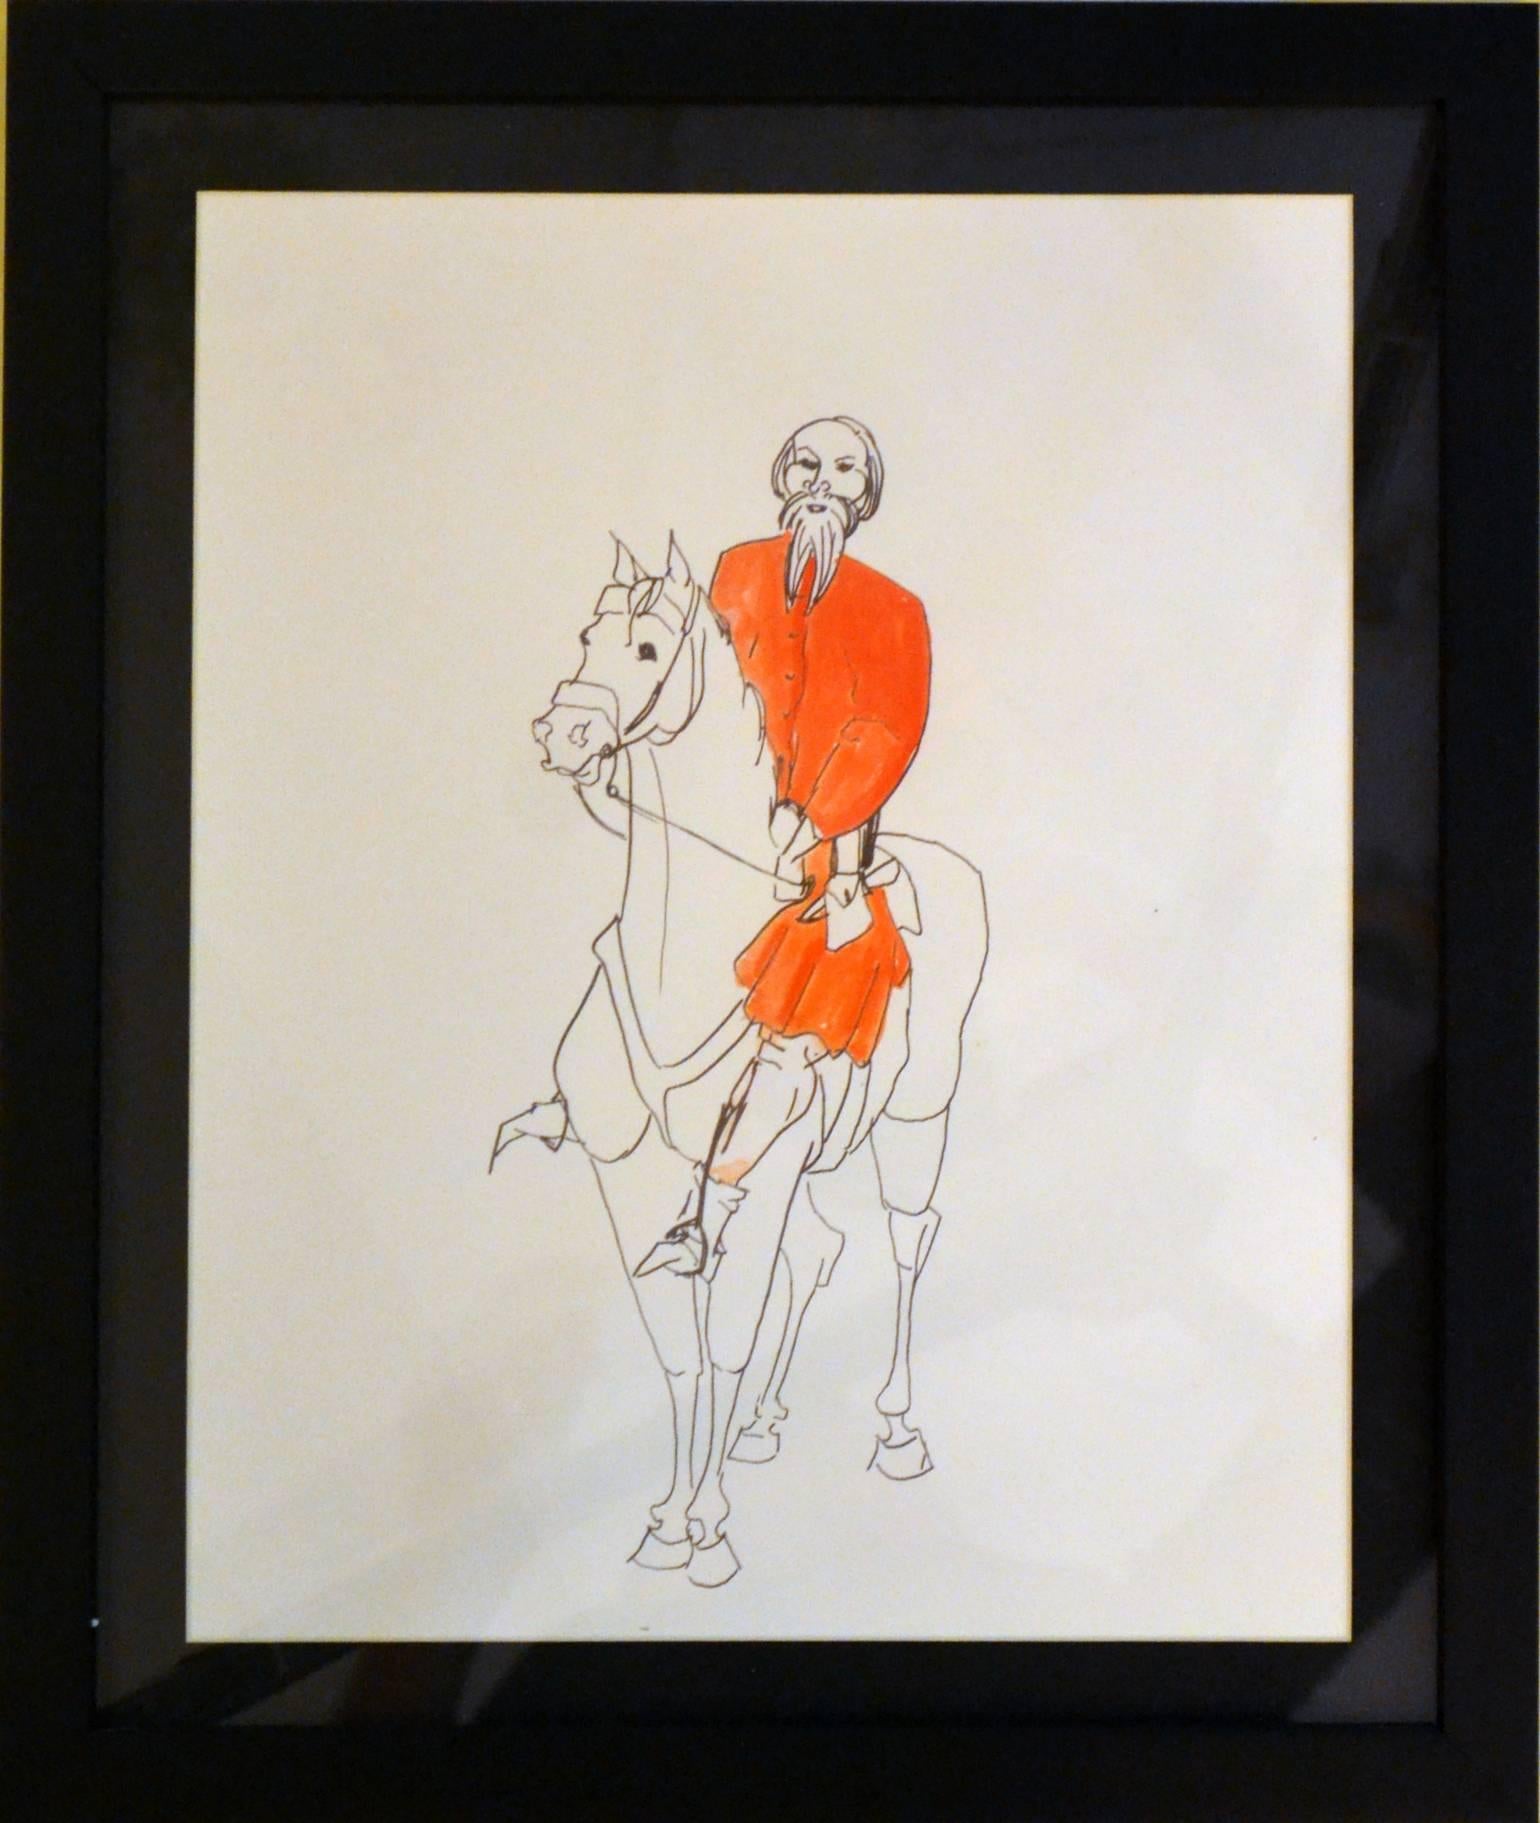 Four drawings with partial watercoloring of characters from the medieval period traveling on horseback. The drawings have strong resemblance to the pilgrims who journey like in Geoffrey Chaucer's 'Canterbury Tales', 1387-1400.
They are newly framed